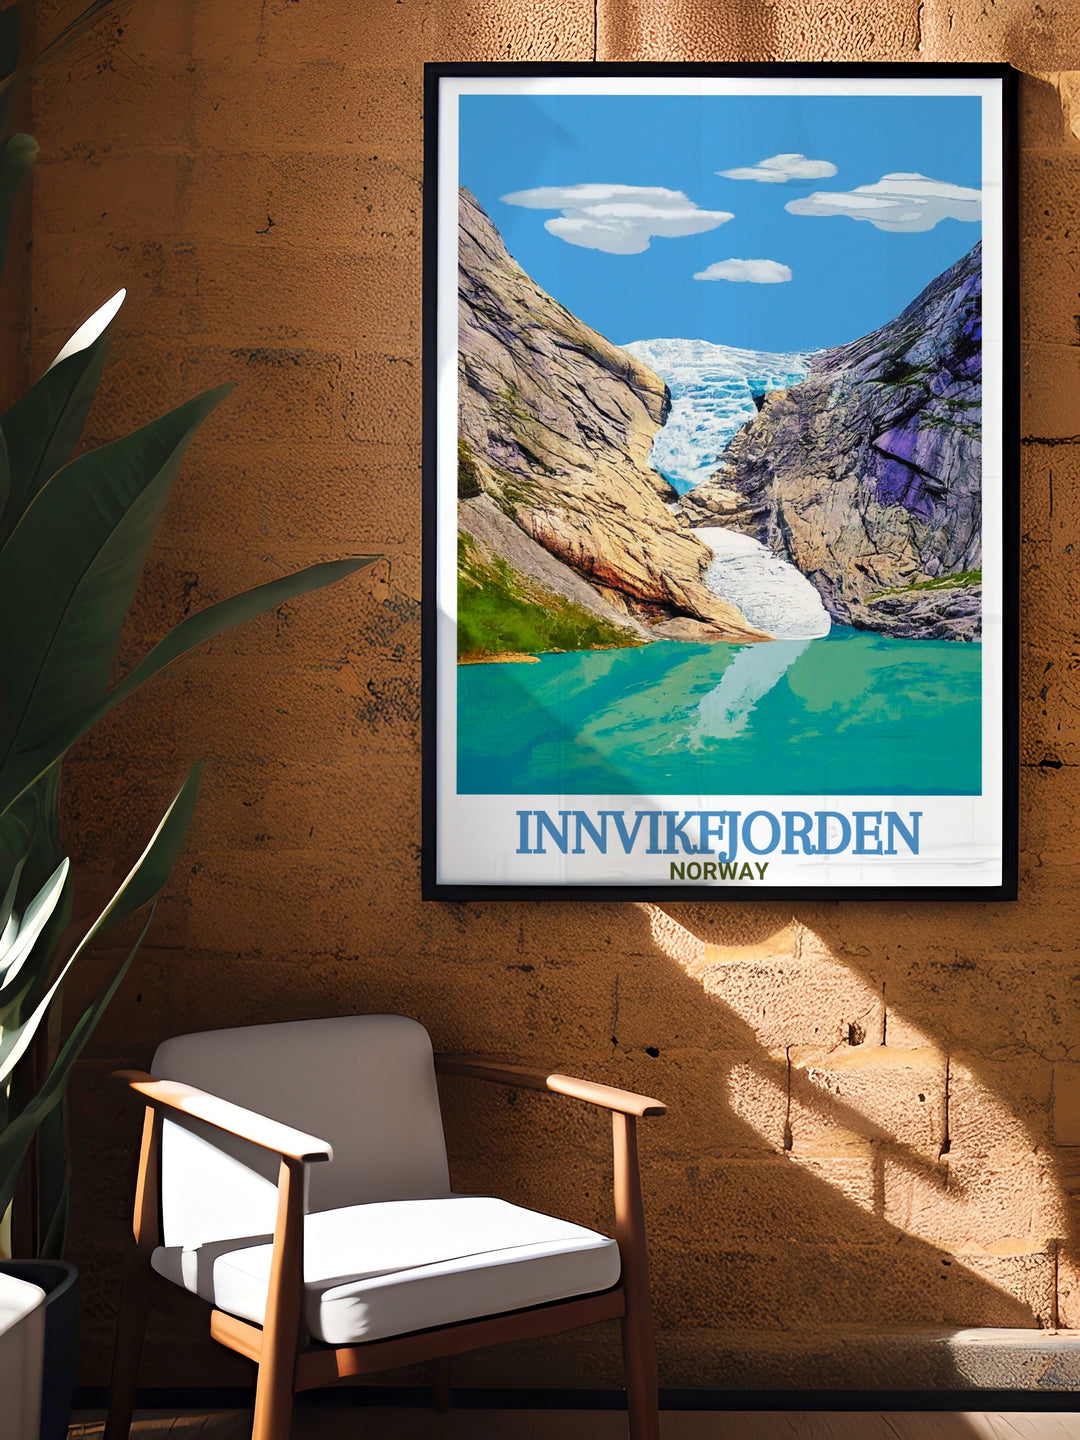 Vintage print of Briksdalsbreen Glacier showcasing the picturesque Norway landscape and peaceful fjord waters ideal for home decor or gifts